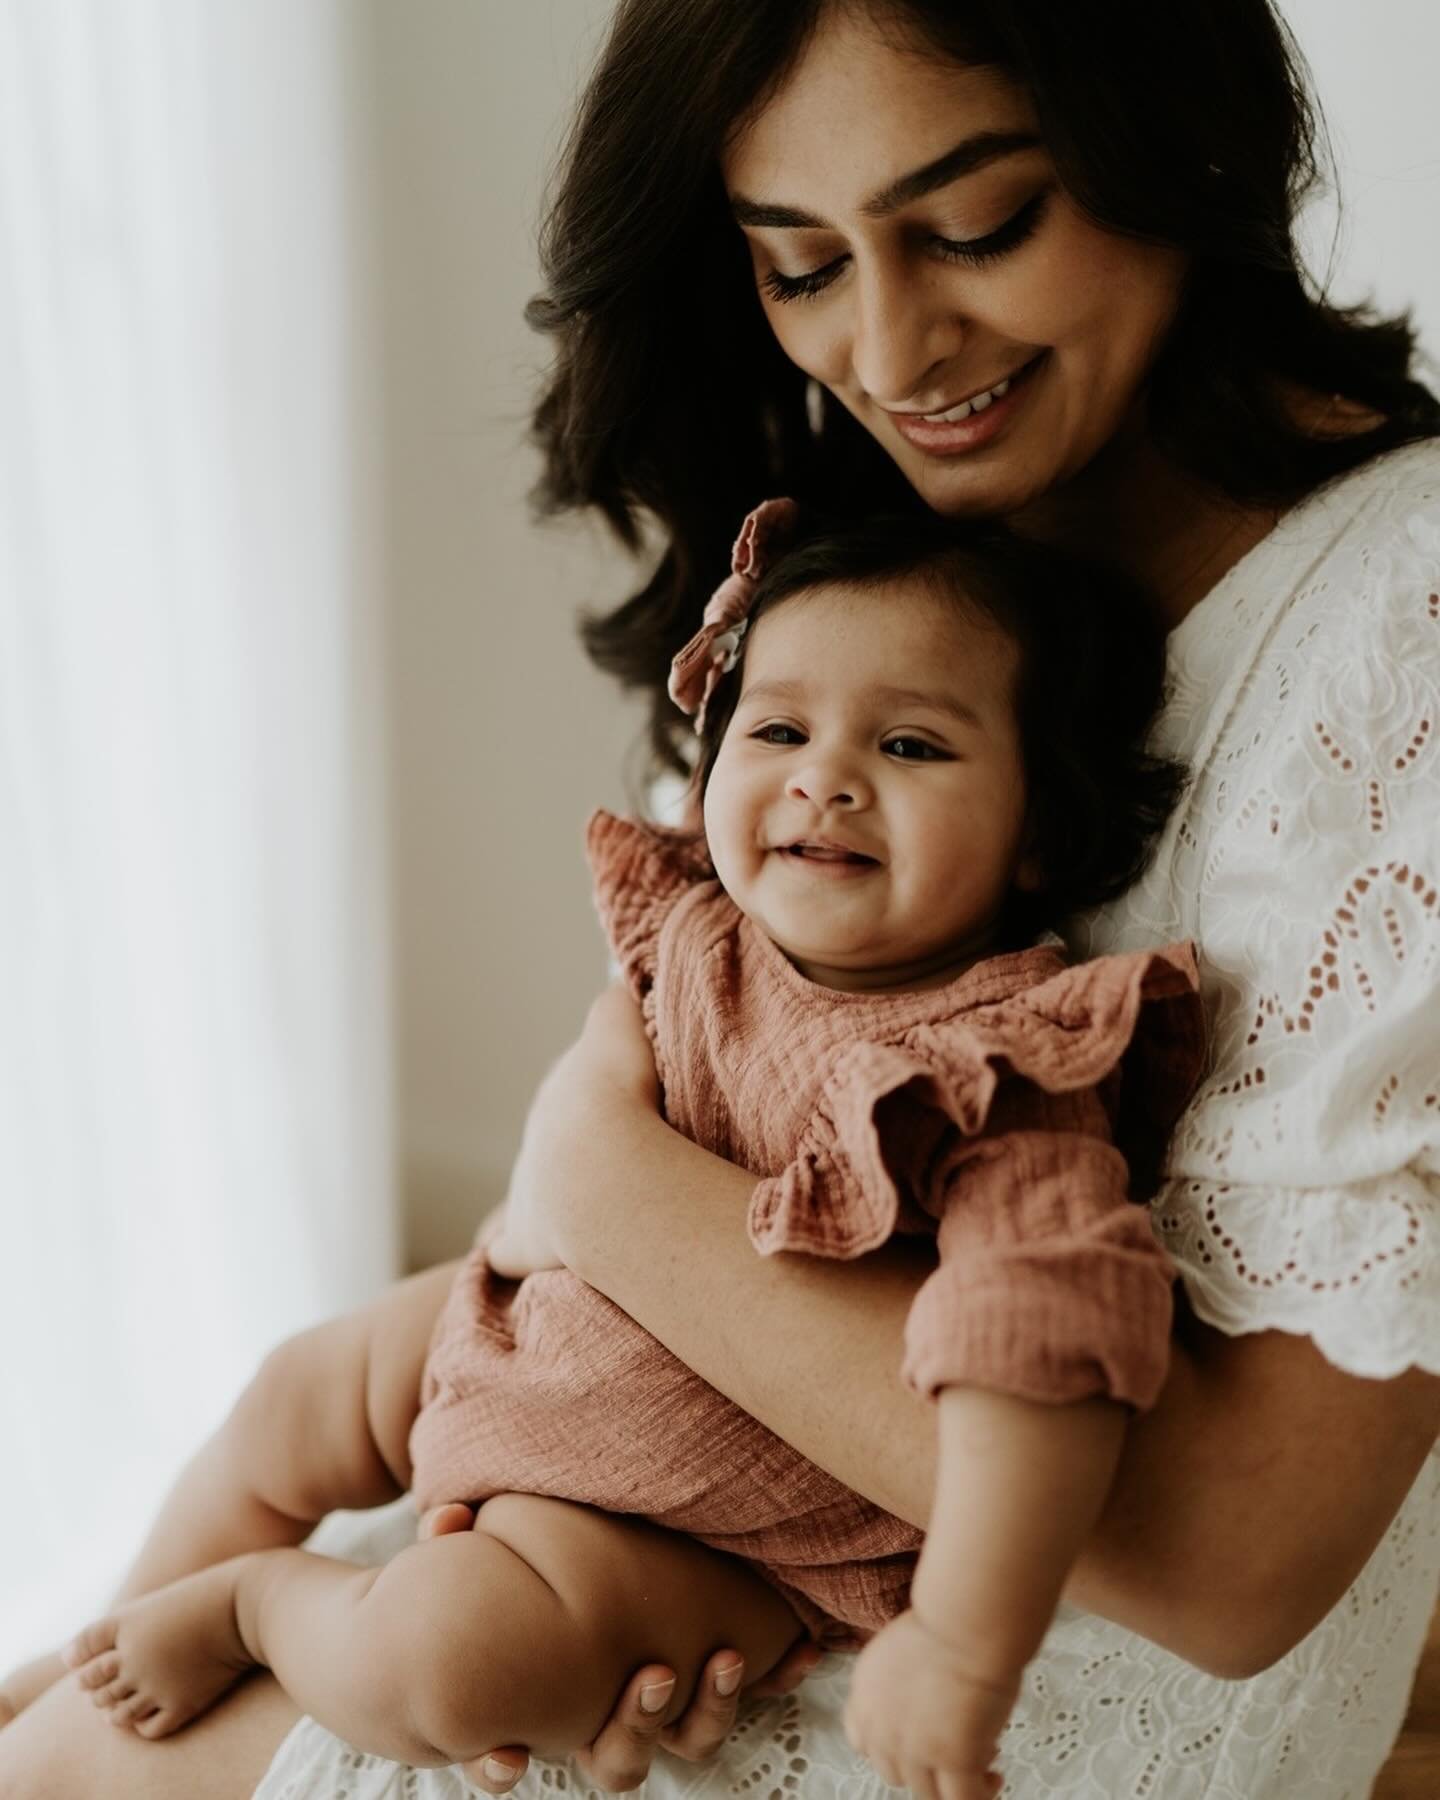 You asked me to show you more final results of our beautiful sessions and so here you are!

I had the immense privilege to meet this beautiful ladies for their newborn session and then we meet again few months later to capture those beautiful smiles.